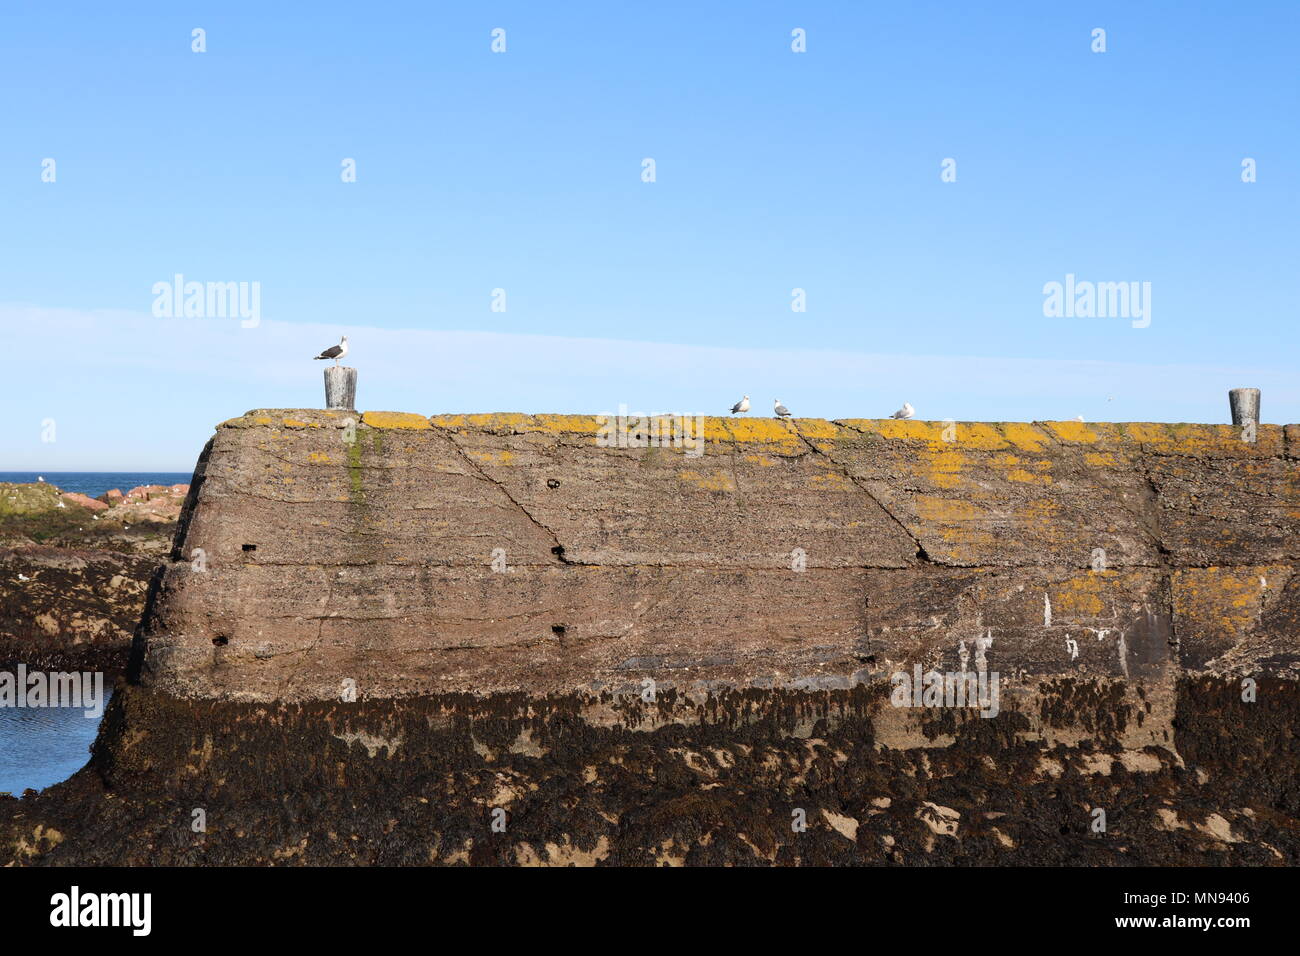 Seagulls sitting on old pier with clear blue sky and rocks in background Stock Photo